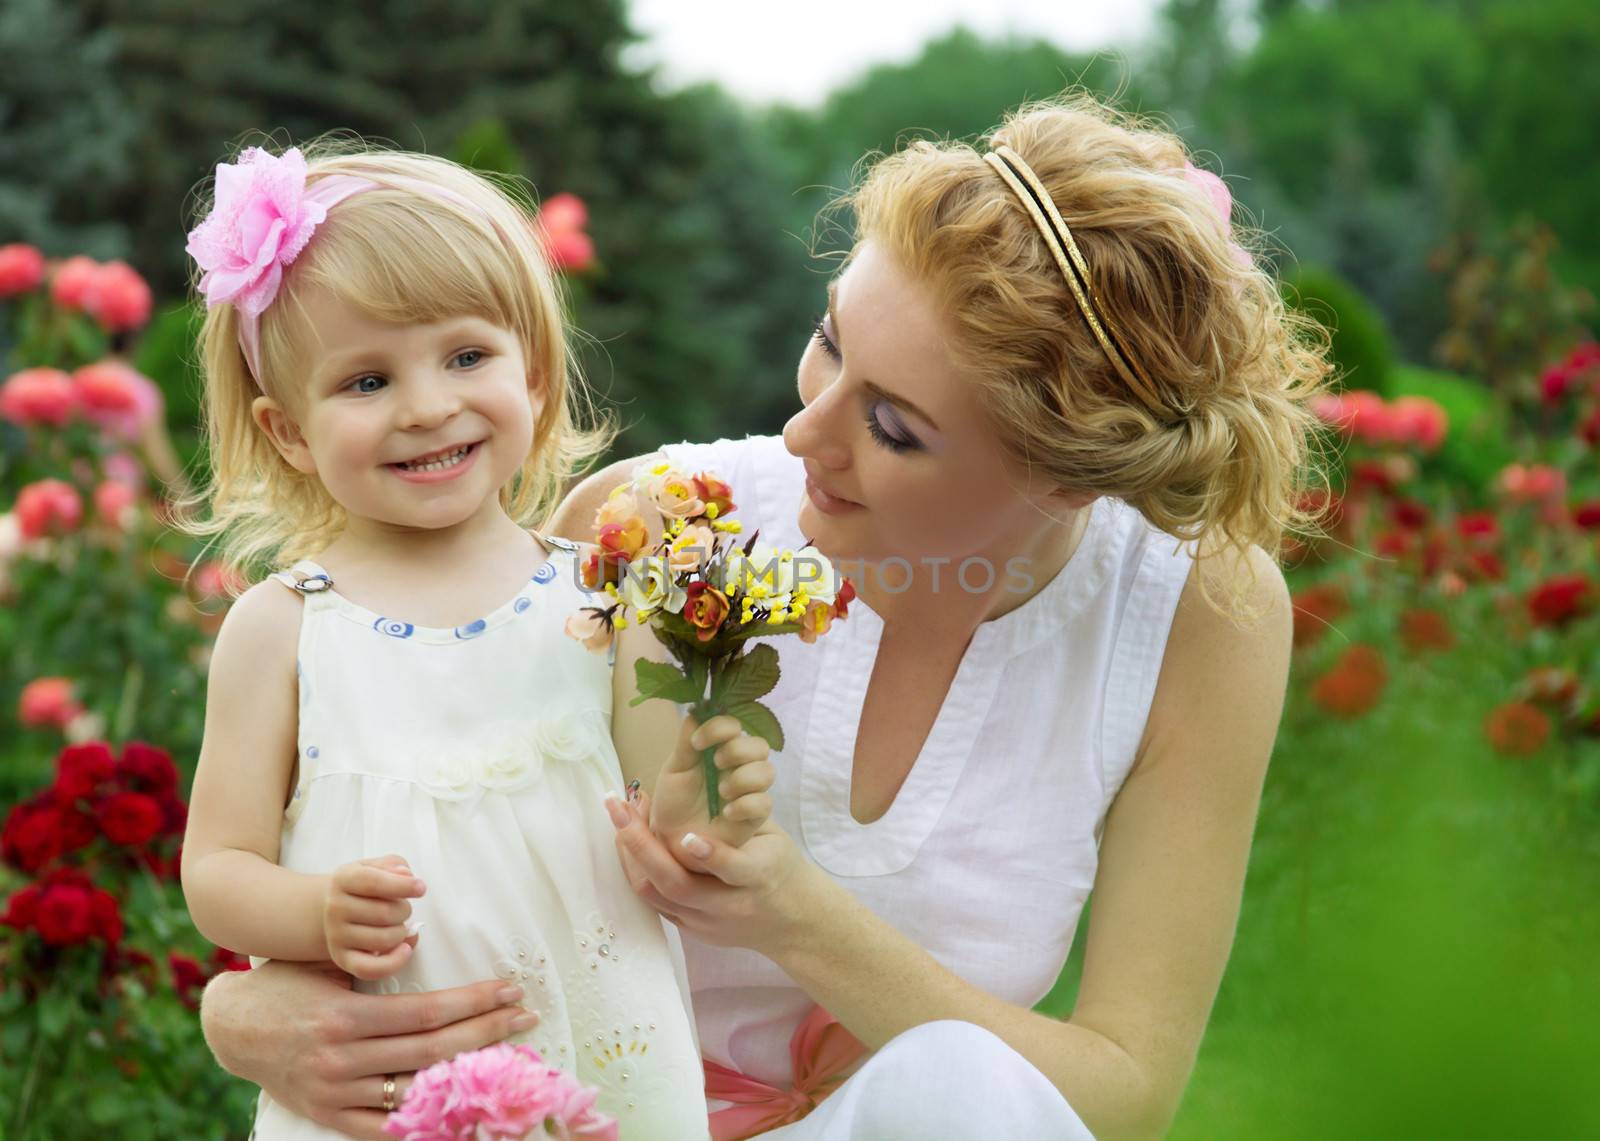 Mother and daughter among pink rose garden by Angel_a